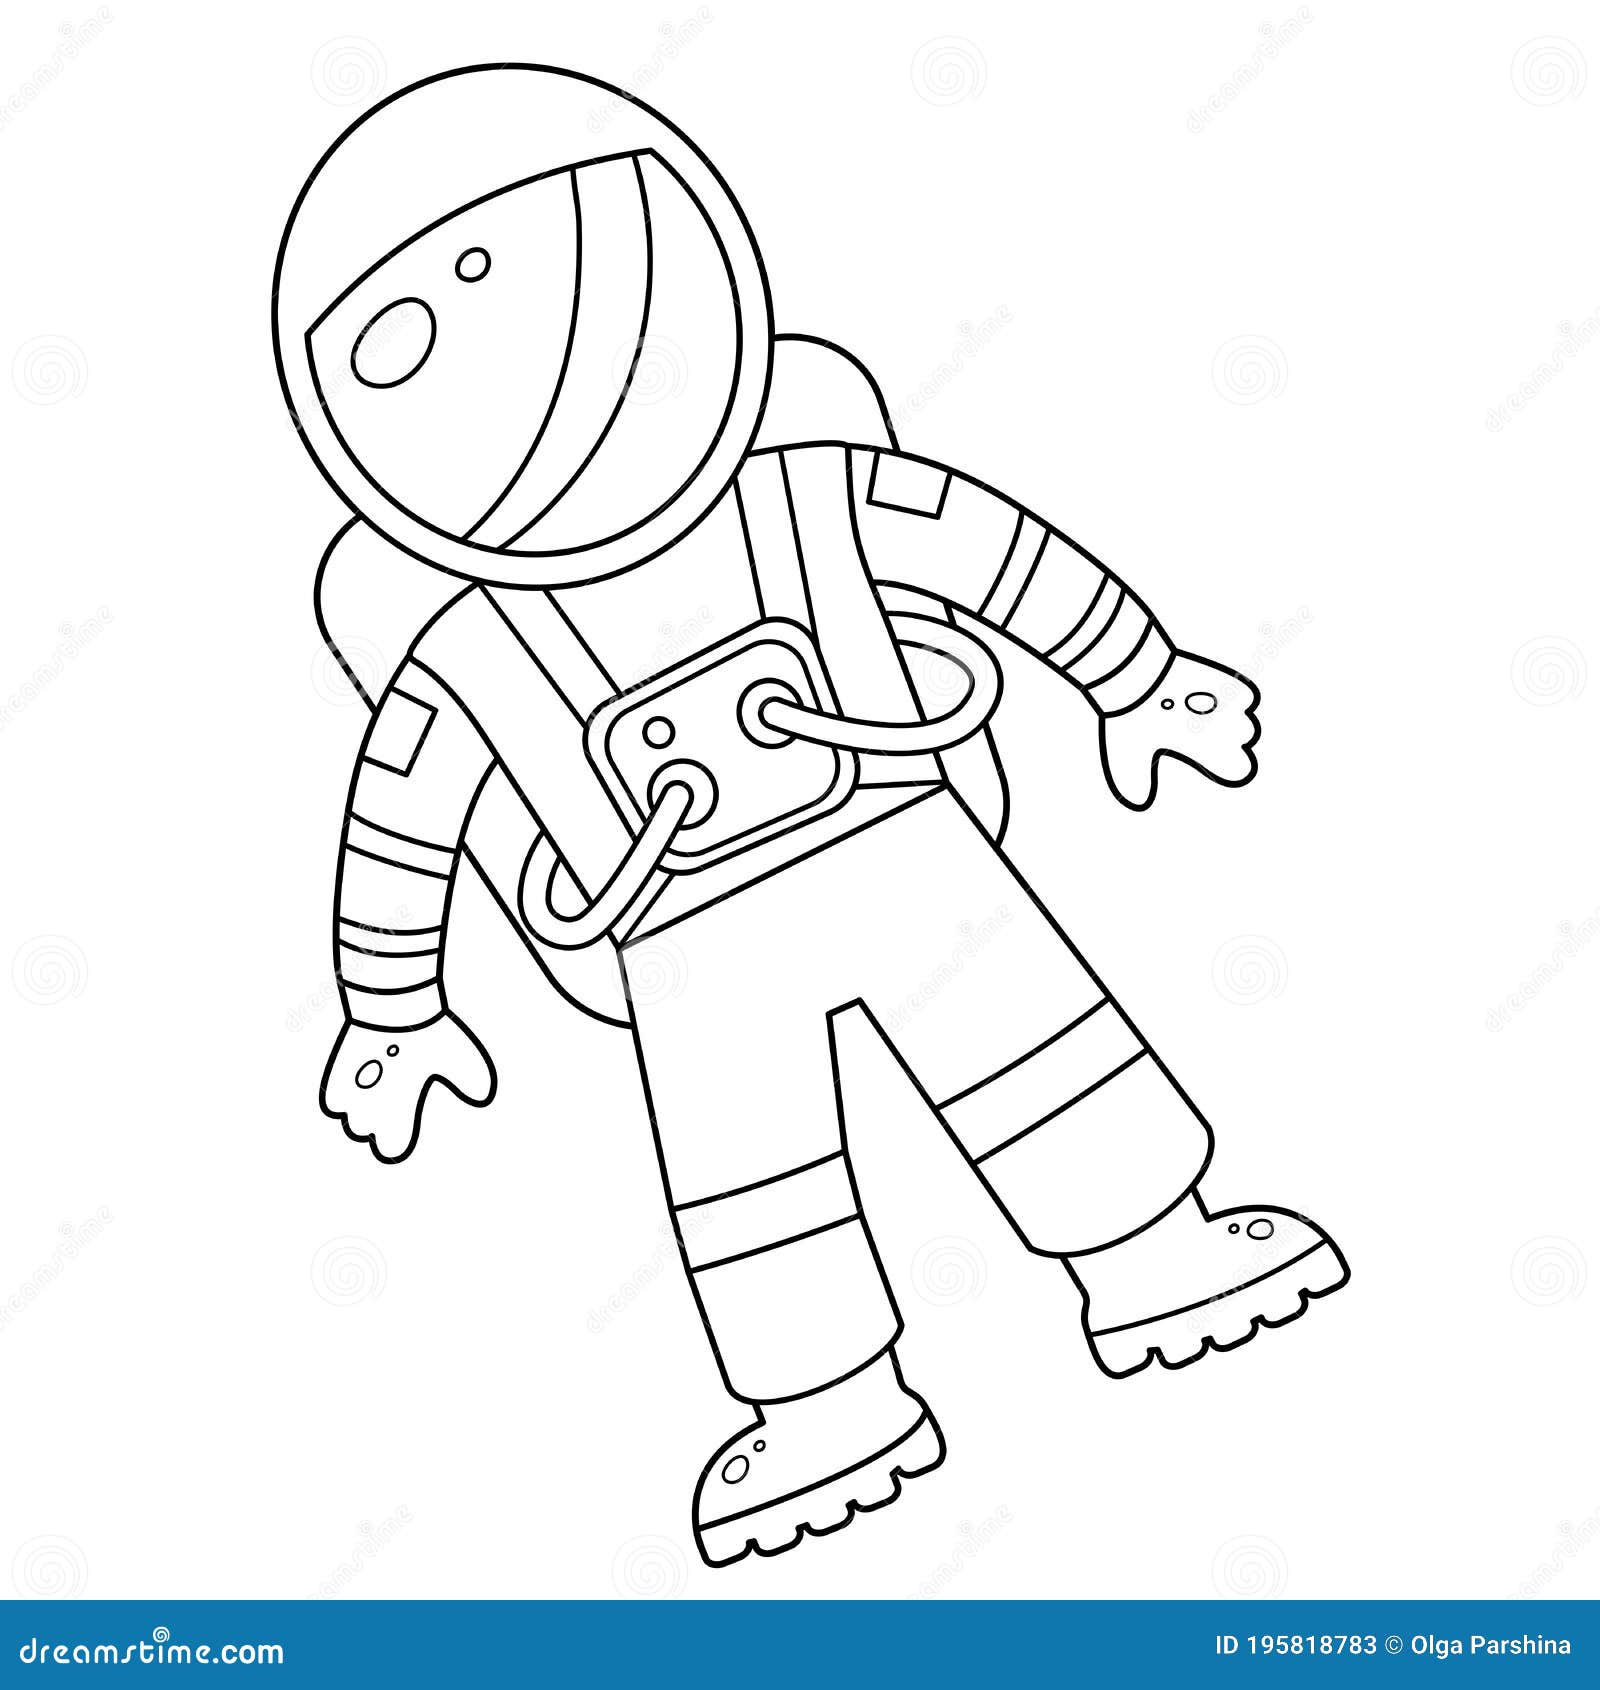 Coloring Page Outline of a Cartoon Astronaut in Spacesuit. Space ...